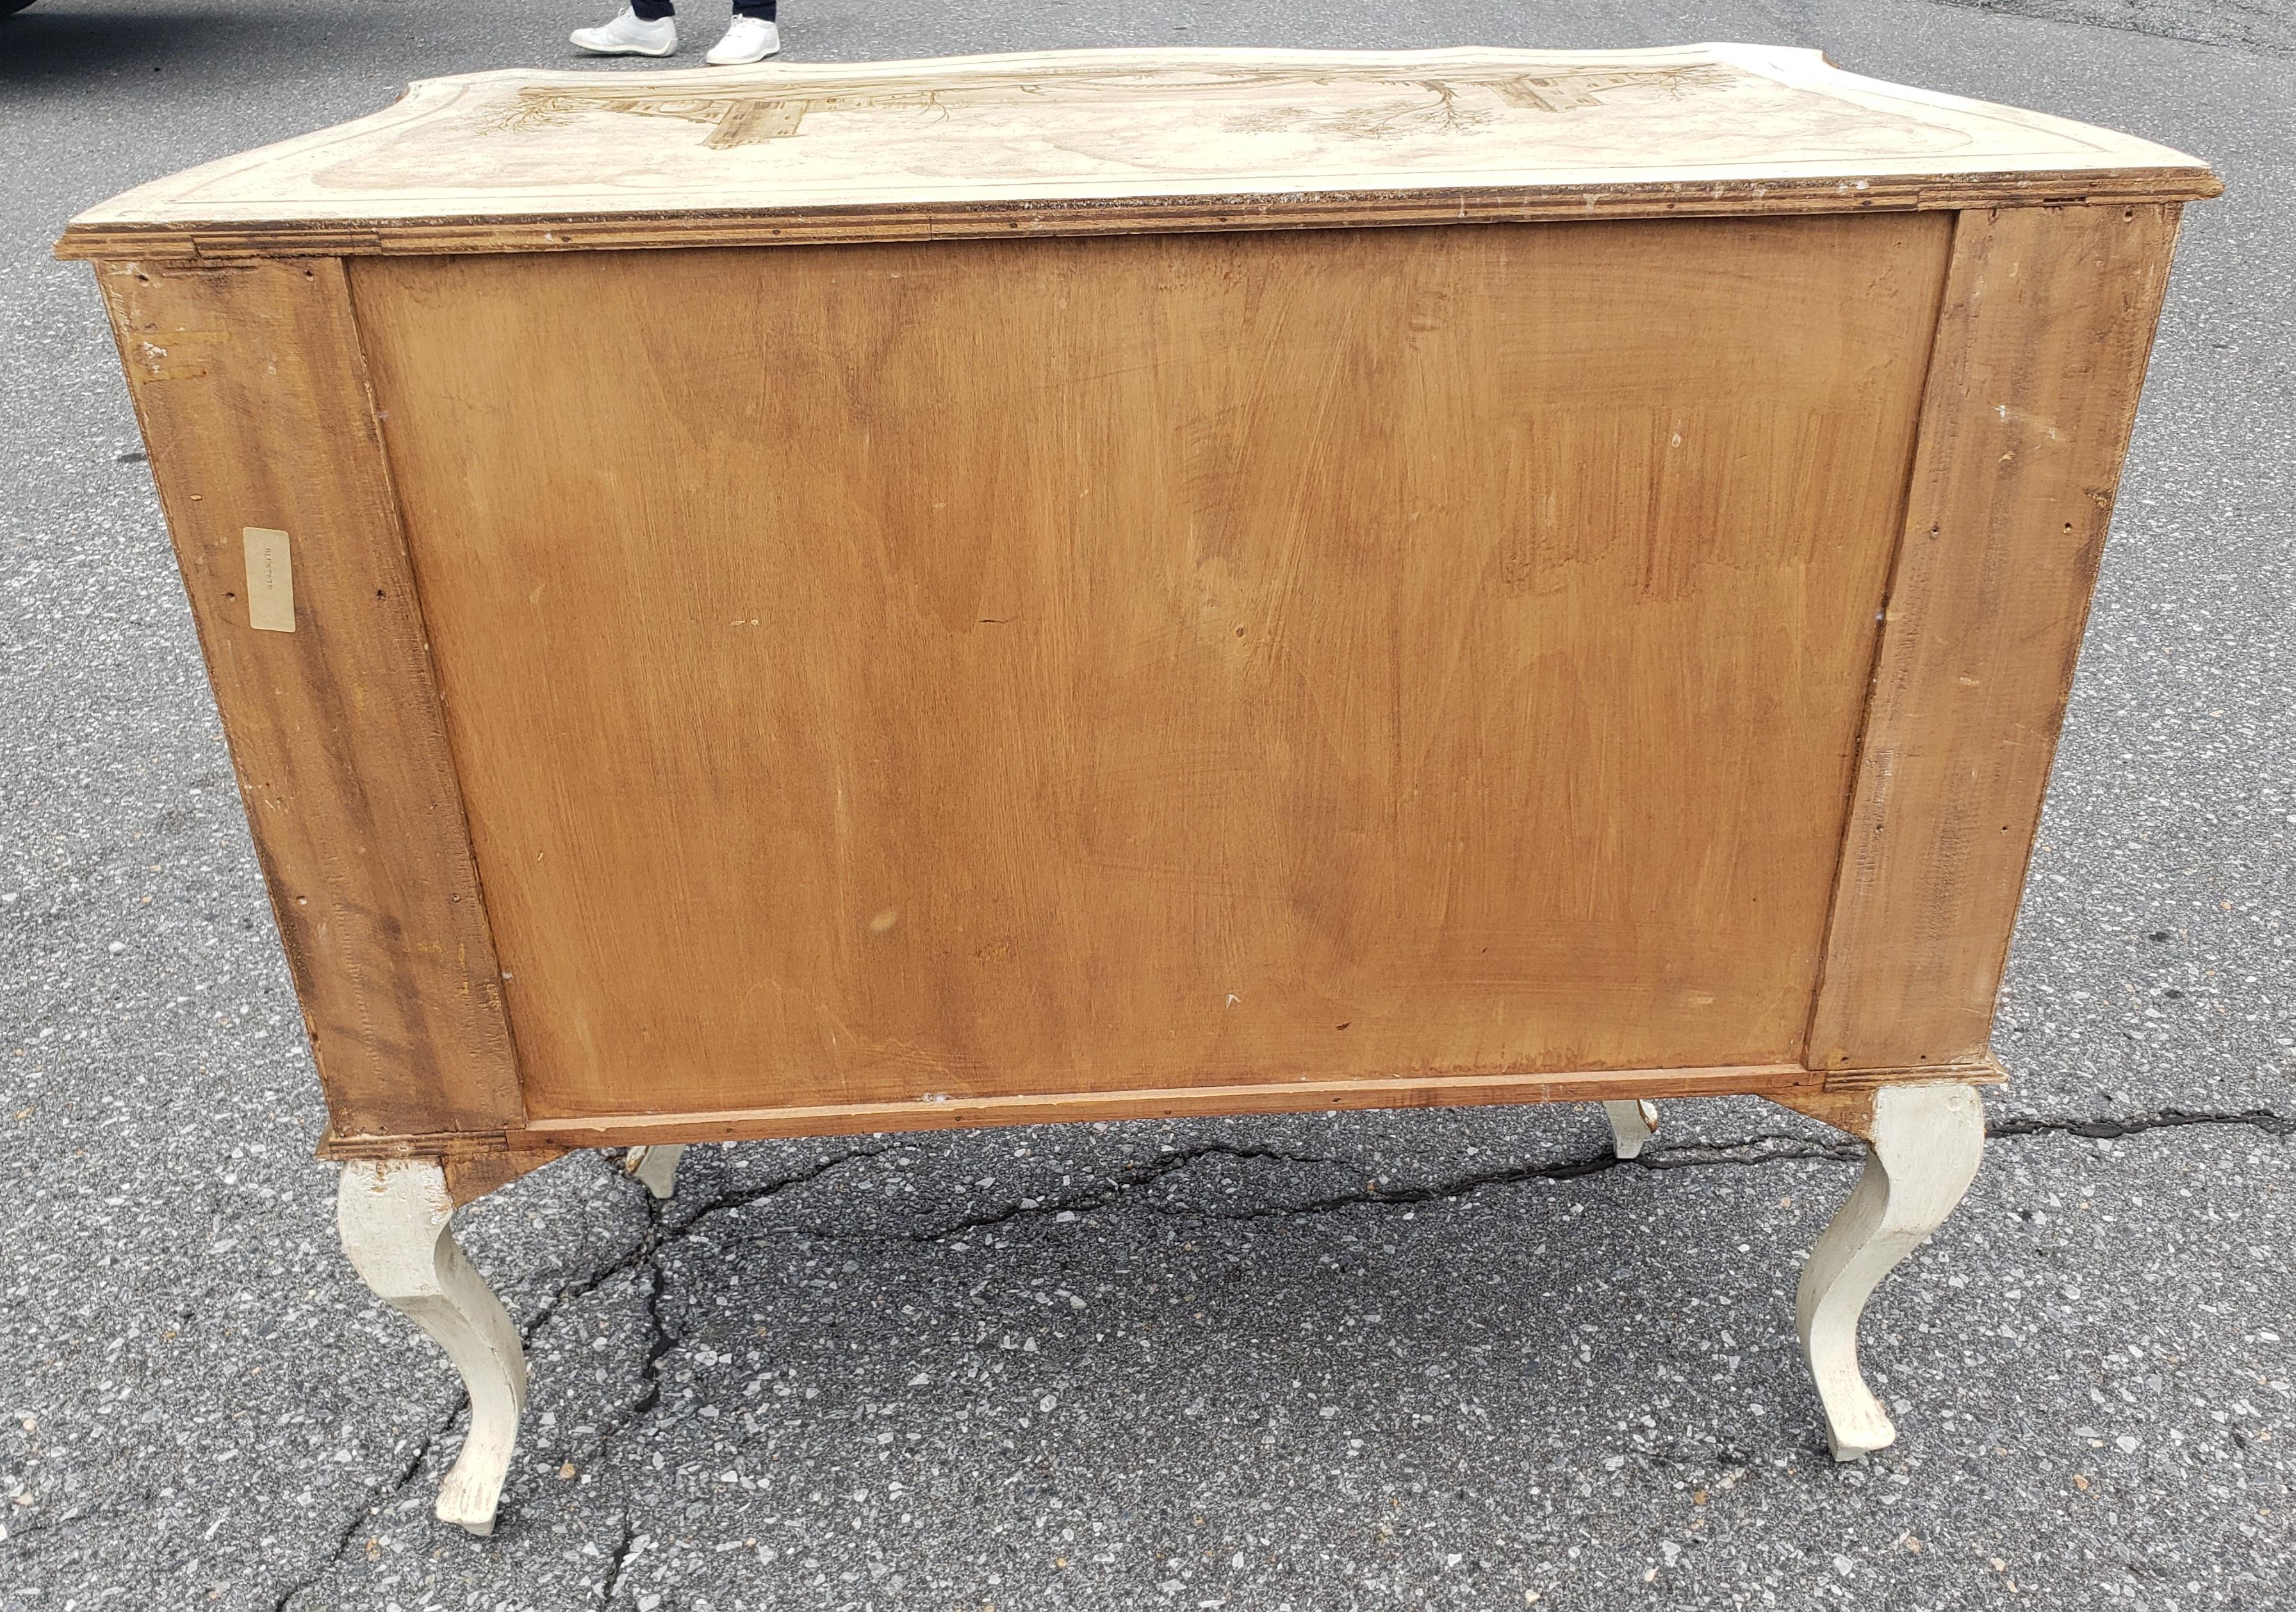 Early 20th C. Venetian Hand-Painted and Decorated Partial Gilt Commode w/ Glass For Sale 6